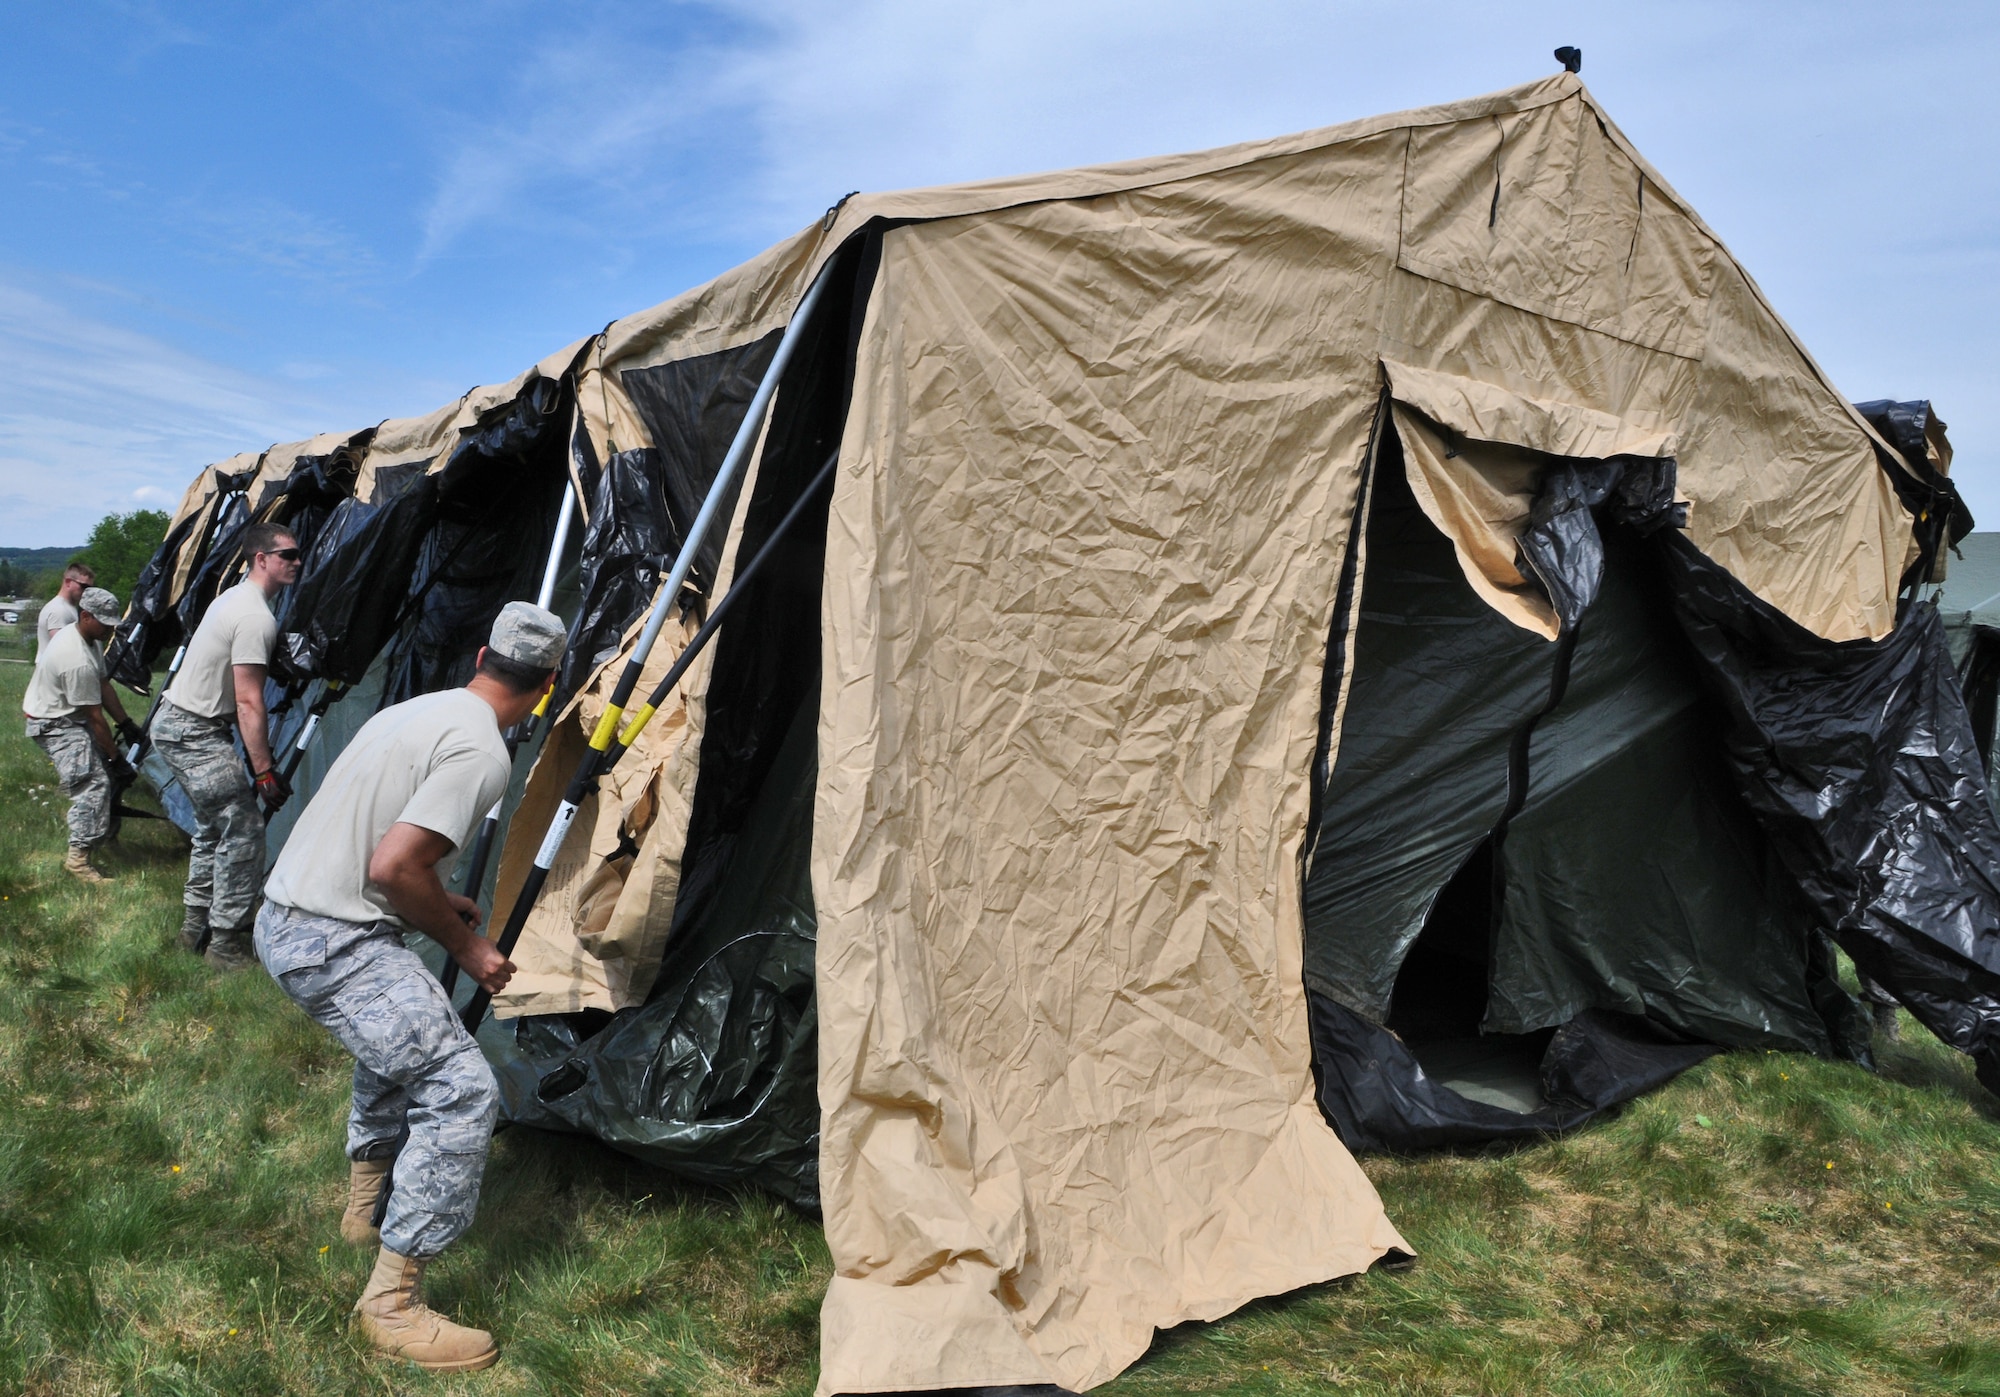 GEROLSTEIN, Germany – Airmen from the 606th Air Control Squadron move and build a tent after arriving to an isolated location as part of exercise Eifel Thunder 2011 in Gerolstein, Germany, May 9. The exercise tested the ability of Airmen to take all their equipment to an isolated location where they set up a deployed radar and satellite communications site as well as everything else required to survive and accomplish the mission in an isolated environment. (U.S. Air Force photo/Senior Airman Nick Wilson)